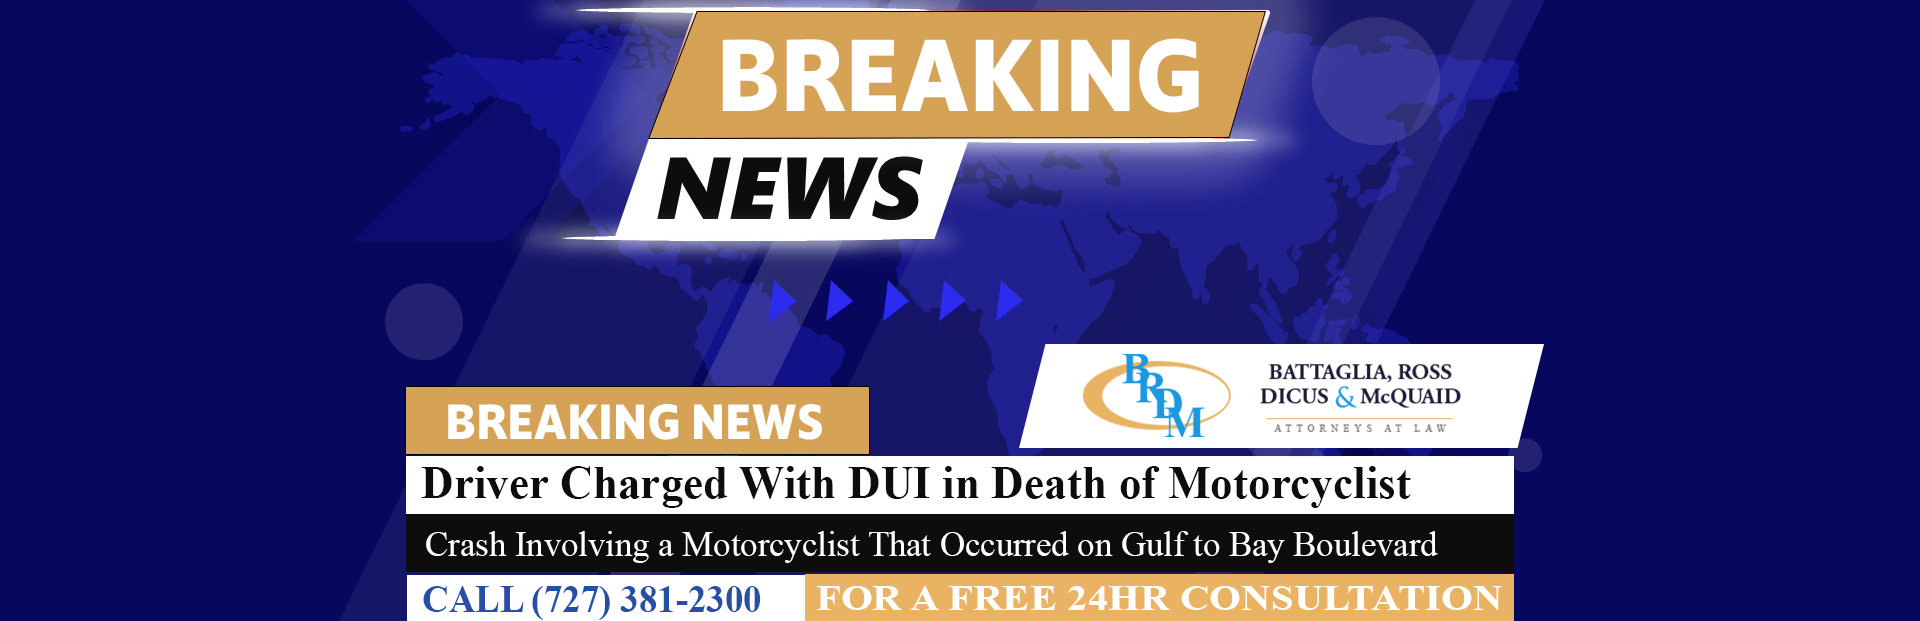 [12-07-22] Driver Charged With DUI Manslaughter in Death of Motorcyclist in Clearwater